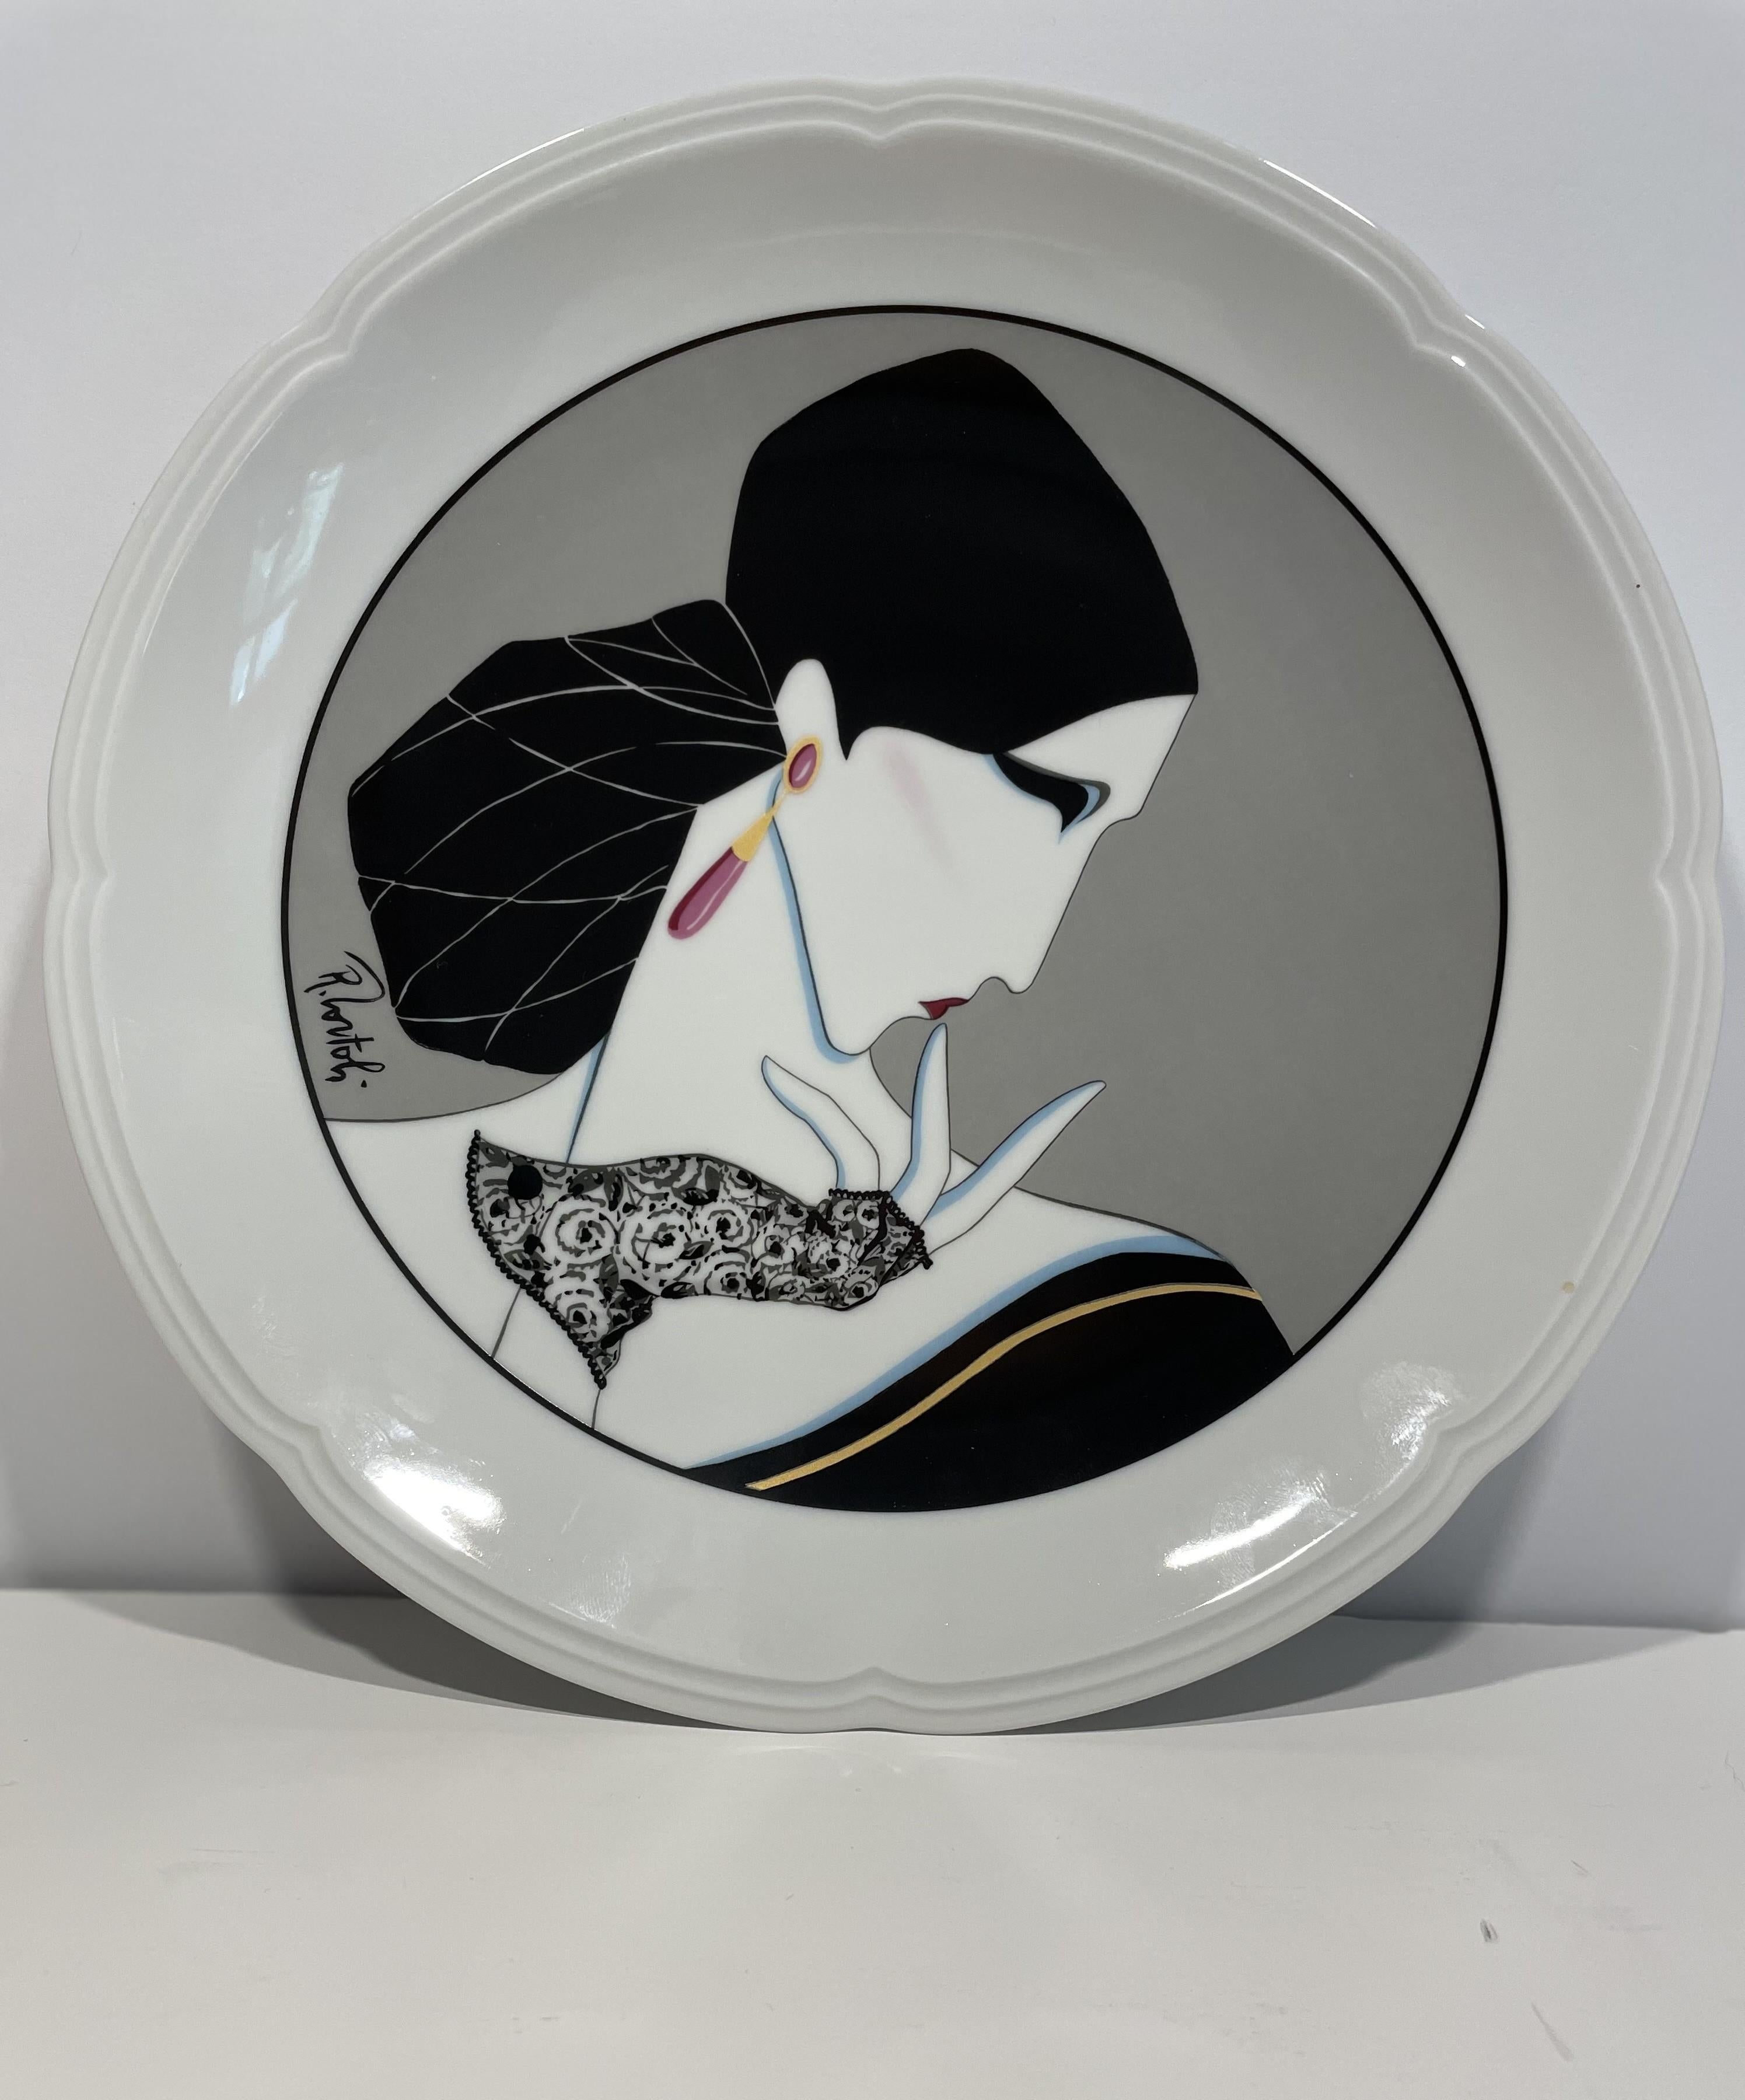 This set of four Art Deco dinner or desert plates is distinctive. There is a sophistication and modern elegance about this set! You are unlikely to see them coming-and-going. 

They are finely made in a crisp-white French porcelain with a soft,